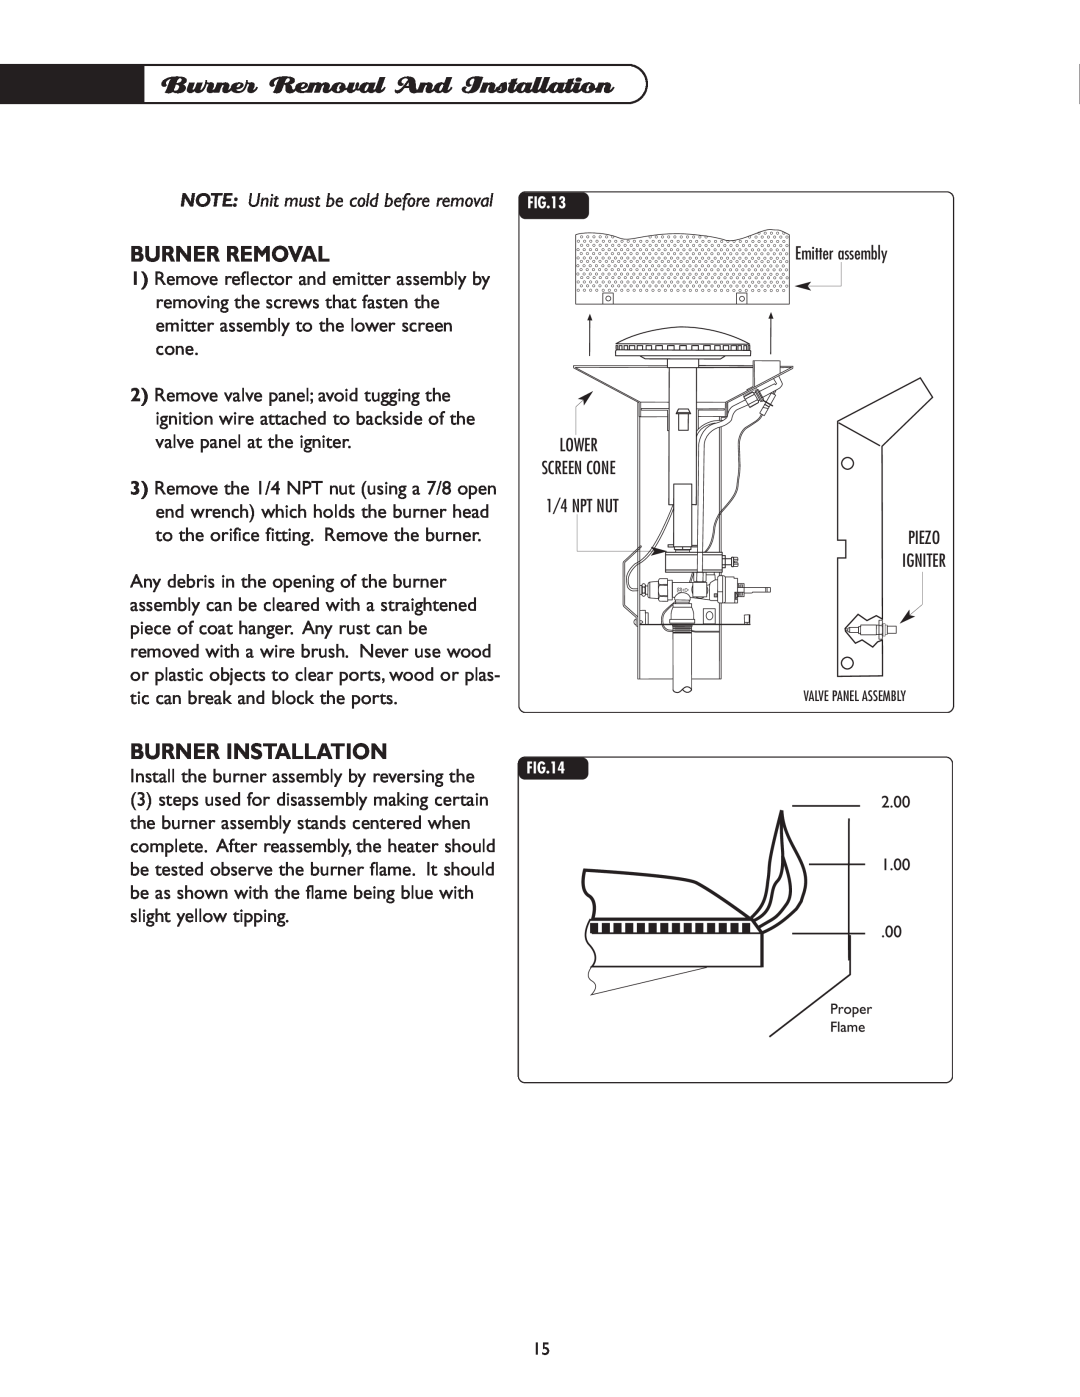 DCS PHFS-DW-SS, PHFS-DW-BK, PHFS-DWWT, PHFS-DW-BL, PHFS-DW-GN, PHFS-DW-BZ manual Burner Removal And Installation 